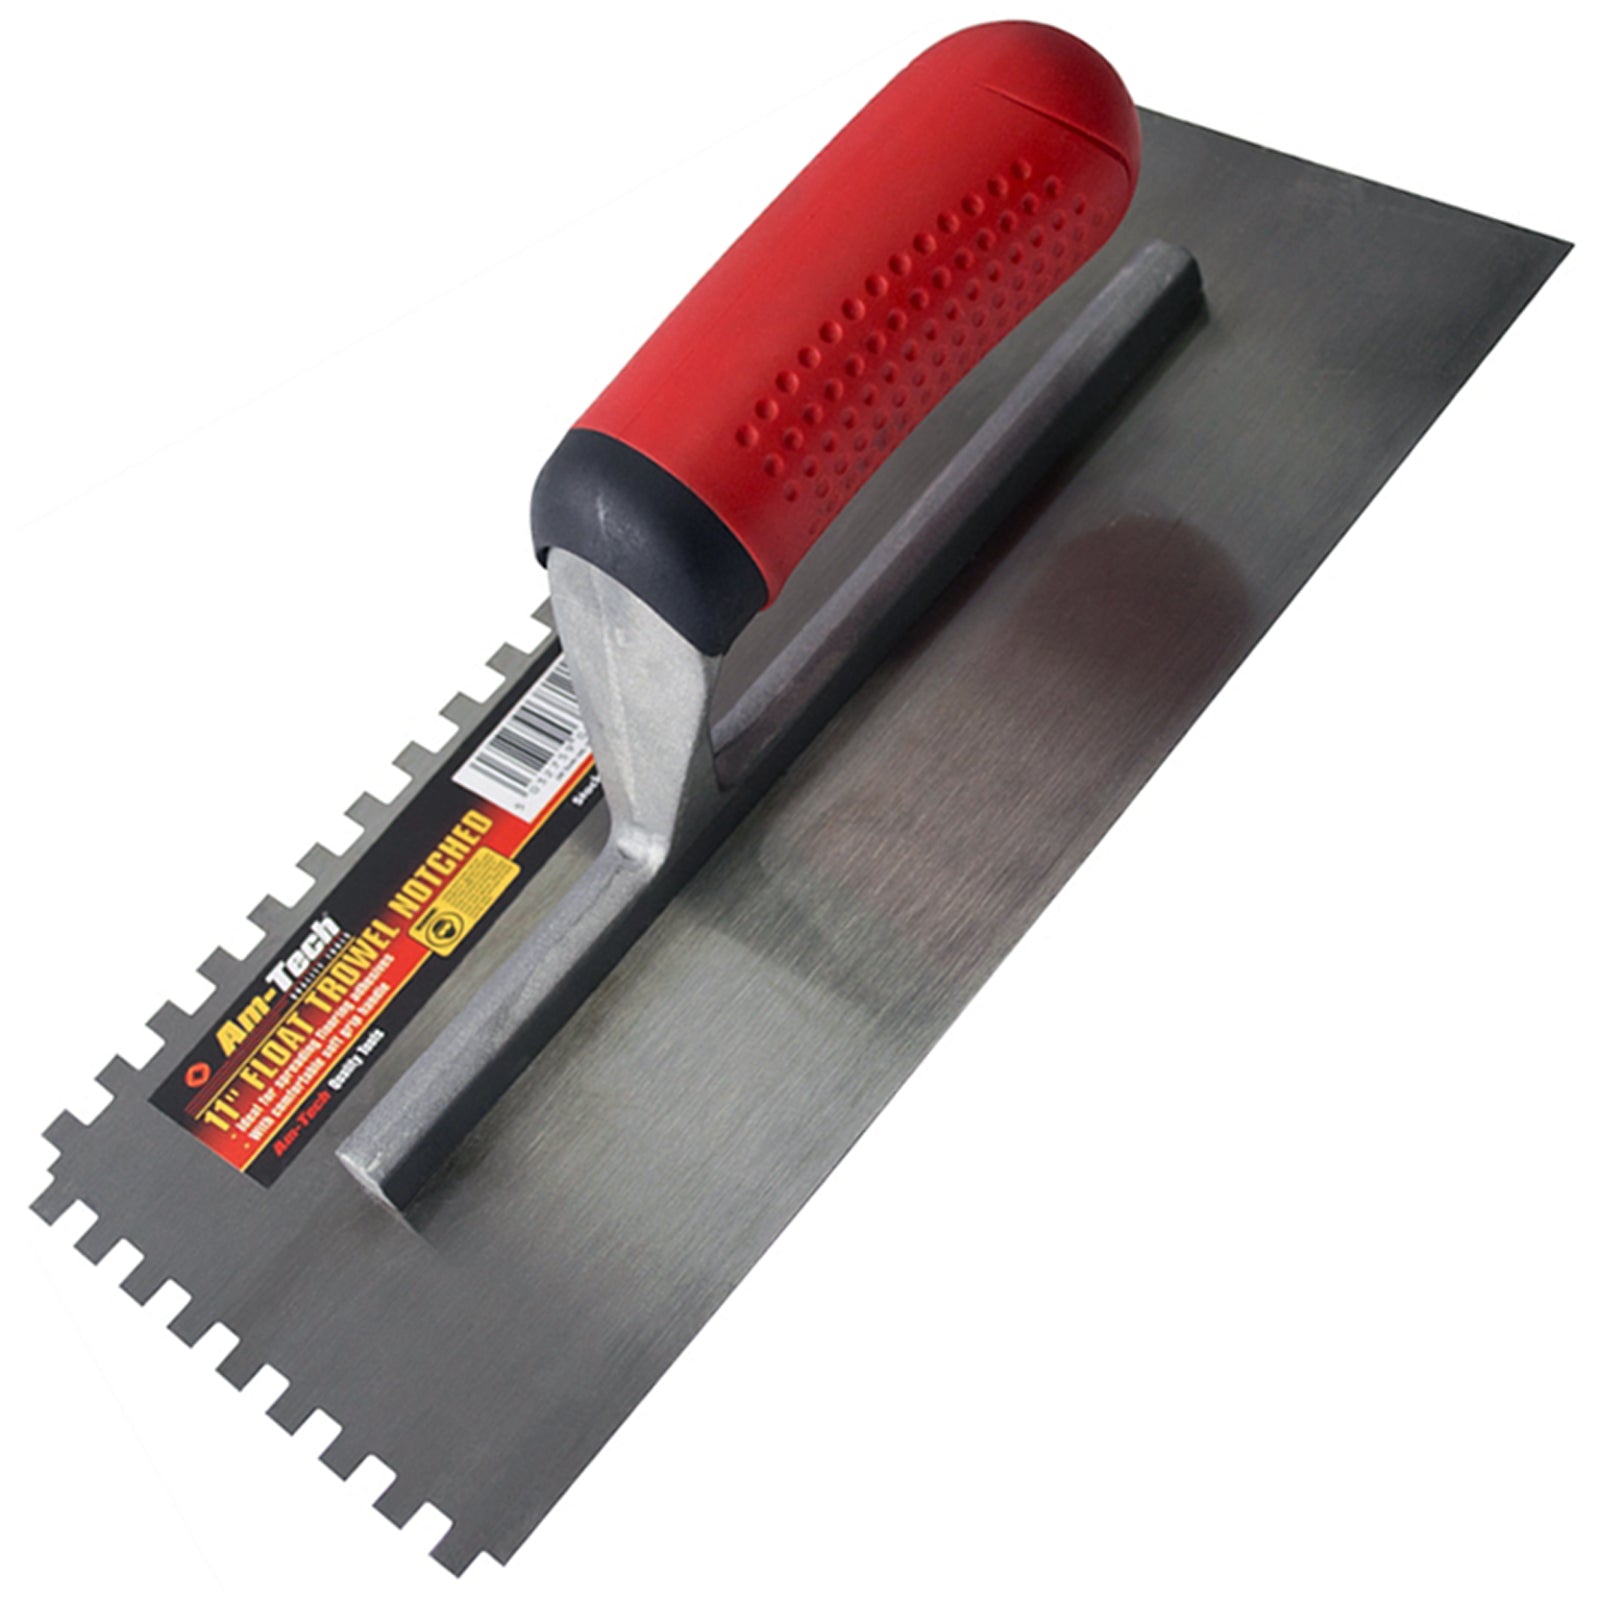 Amtech 275mm (11") Notched Float Trowel with Soft Grip Handle